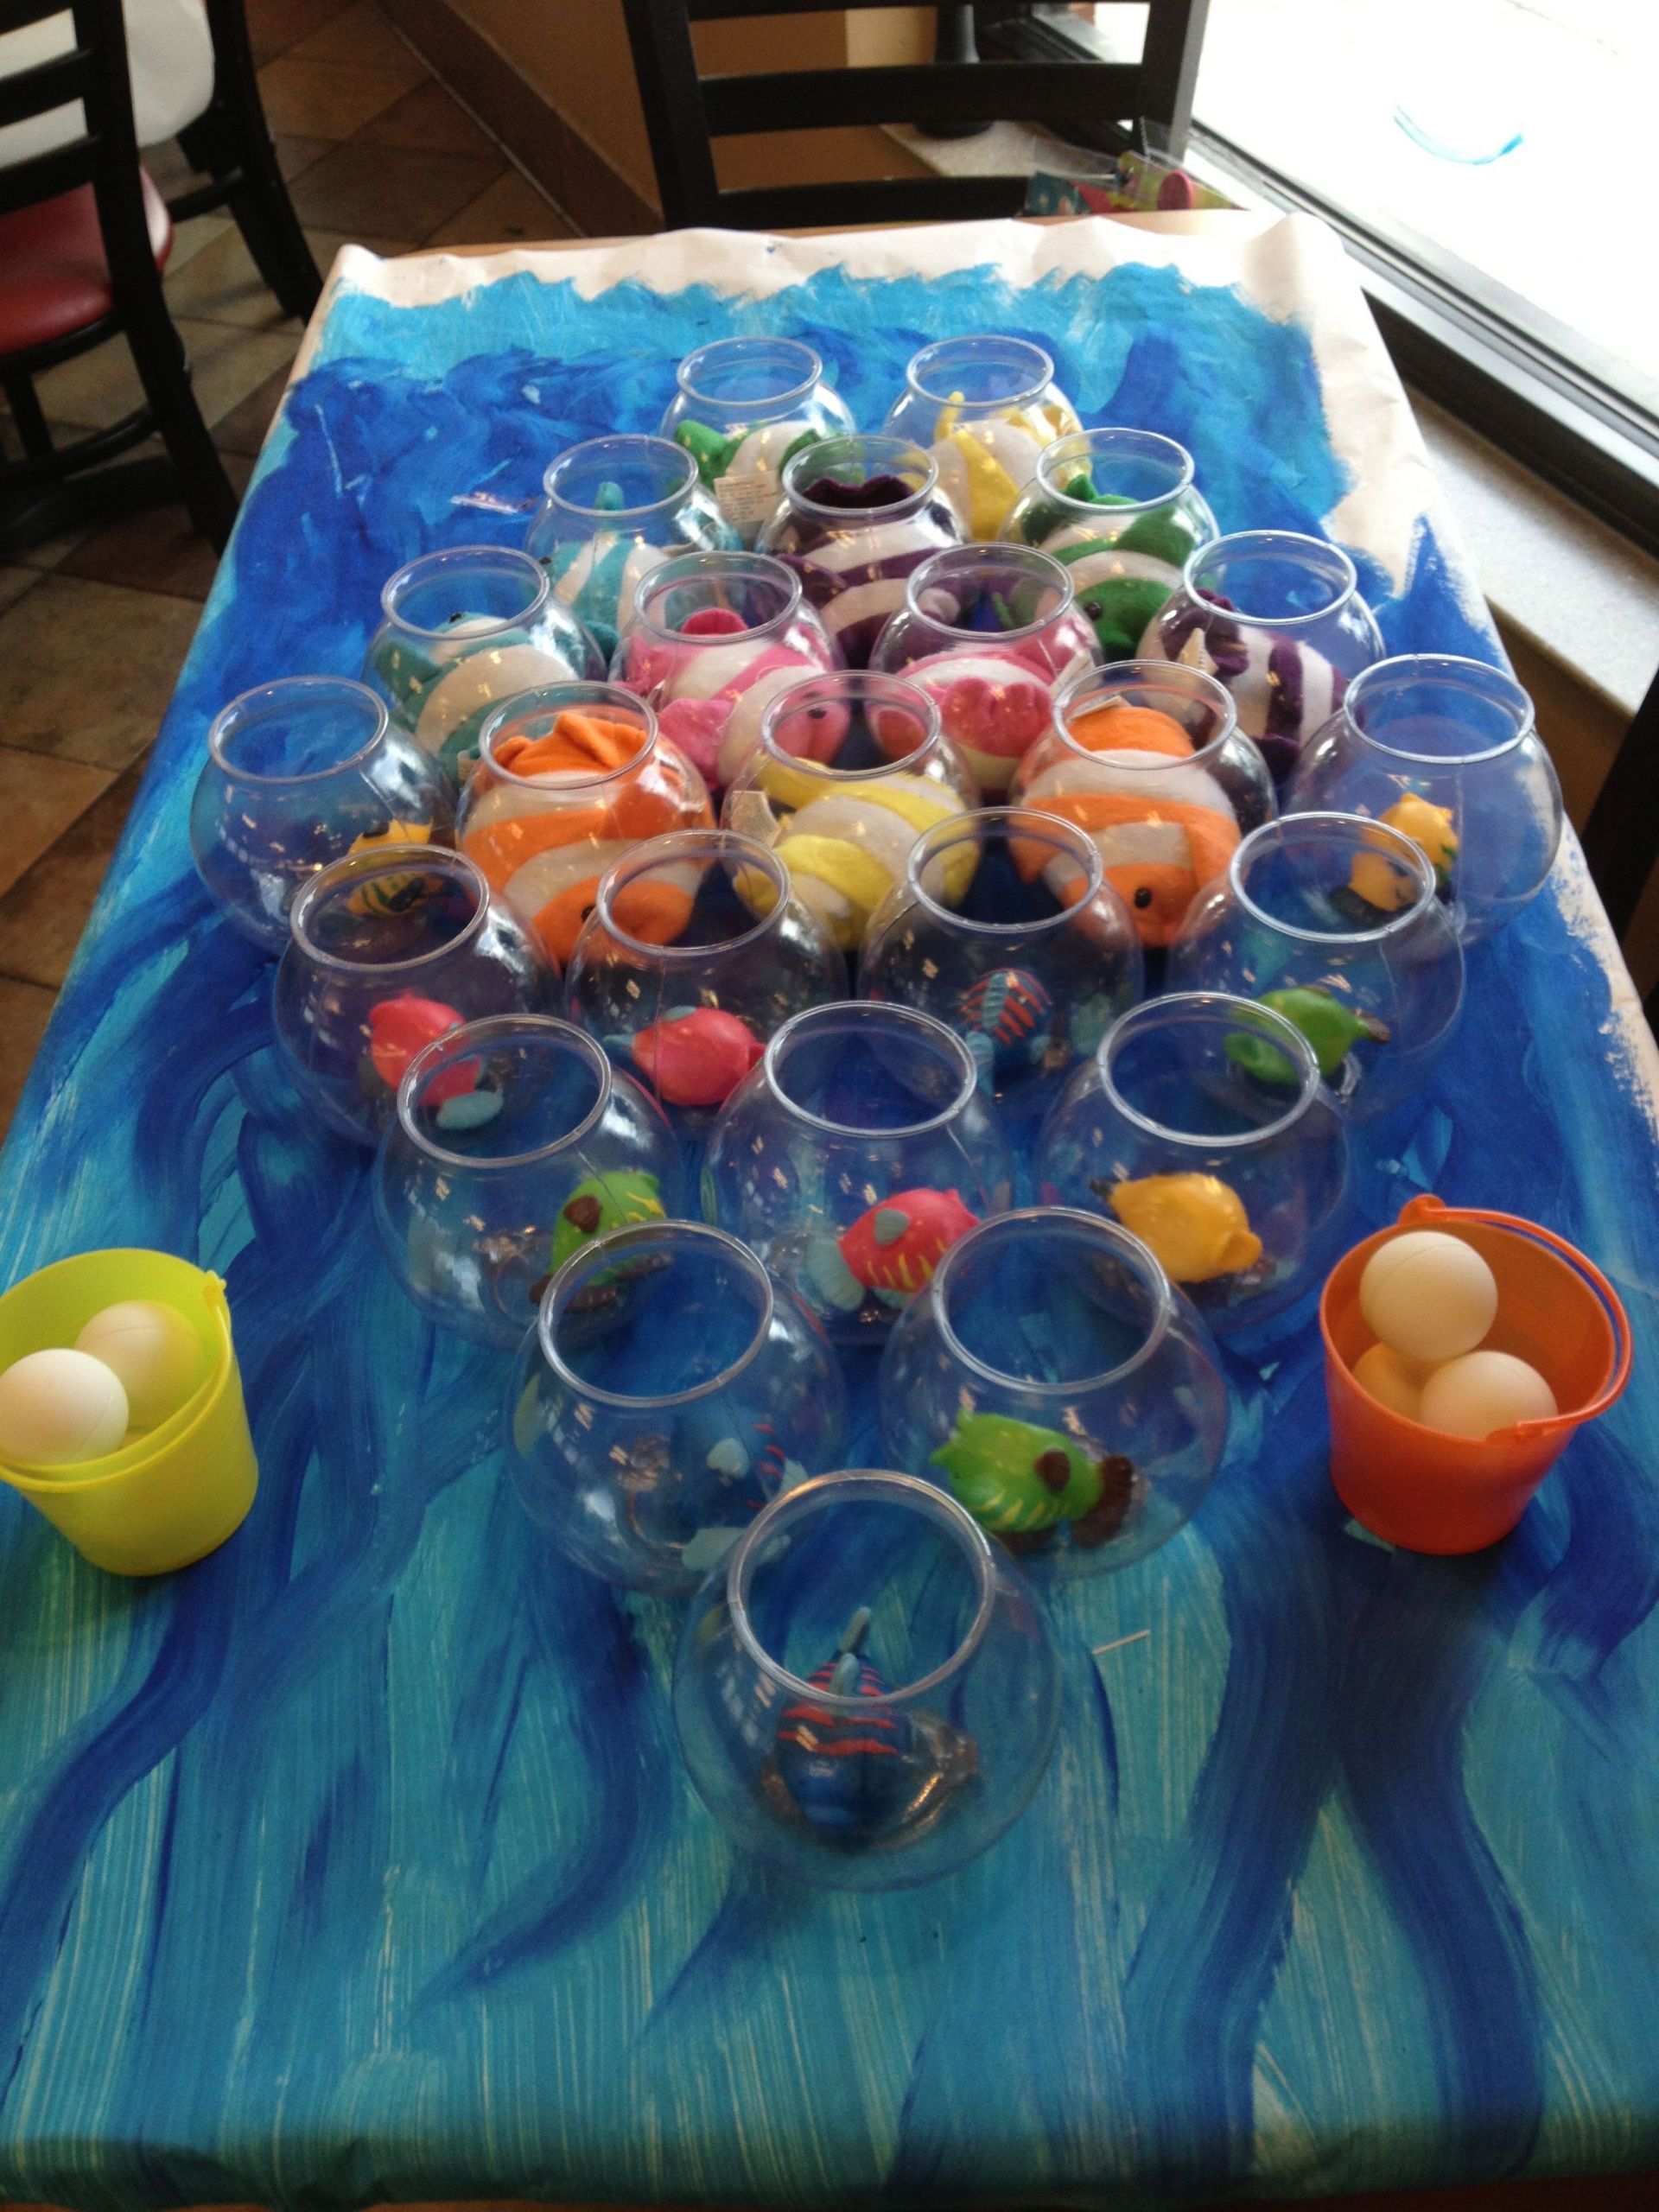 Kids Fish Birthday Party
 This fun under the sea themed game was found online at a